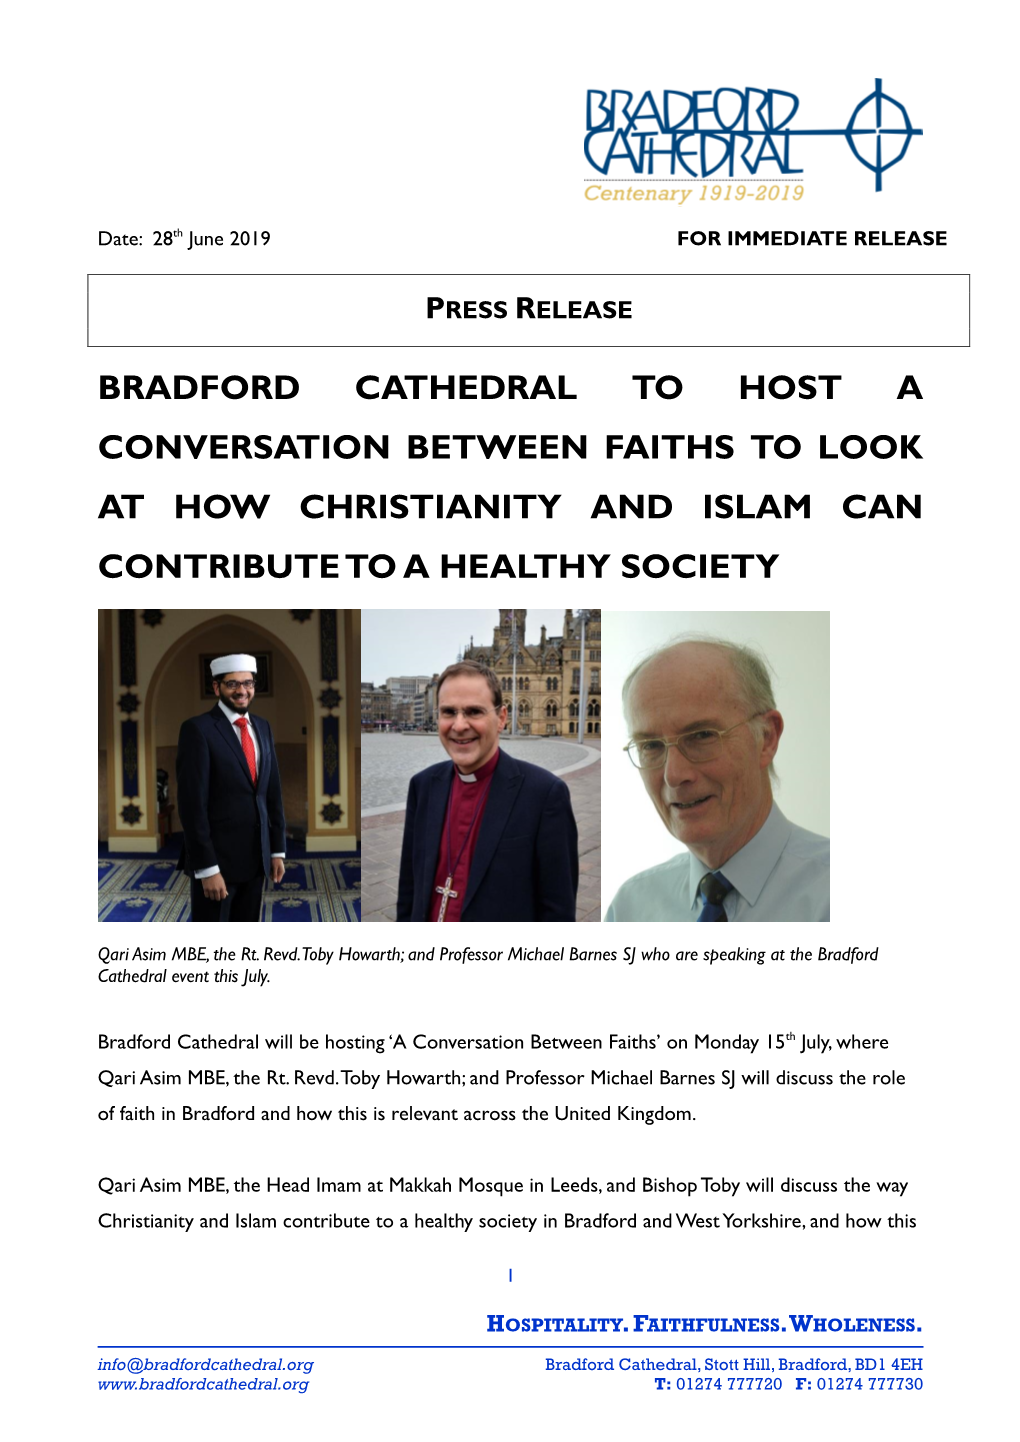 Bradford Cathedral to Host a Conversation Between Faiths to Look at How Christianity and Islam Can Contribute to a Healthy Society